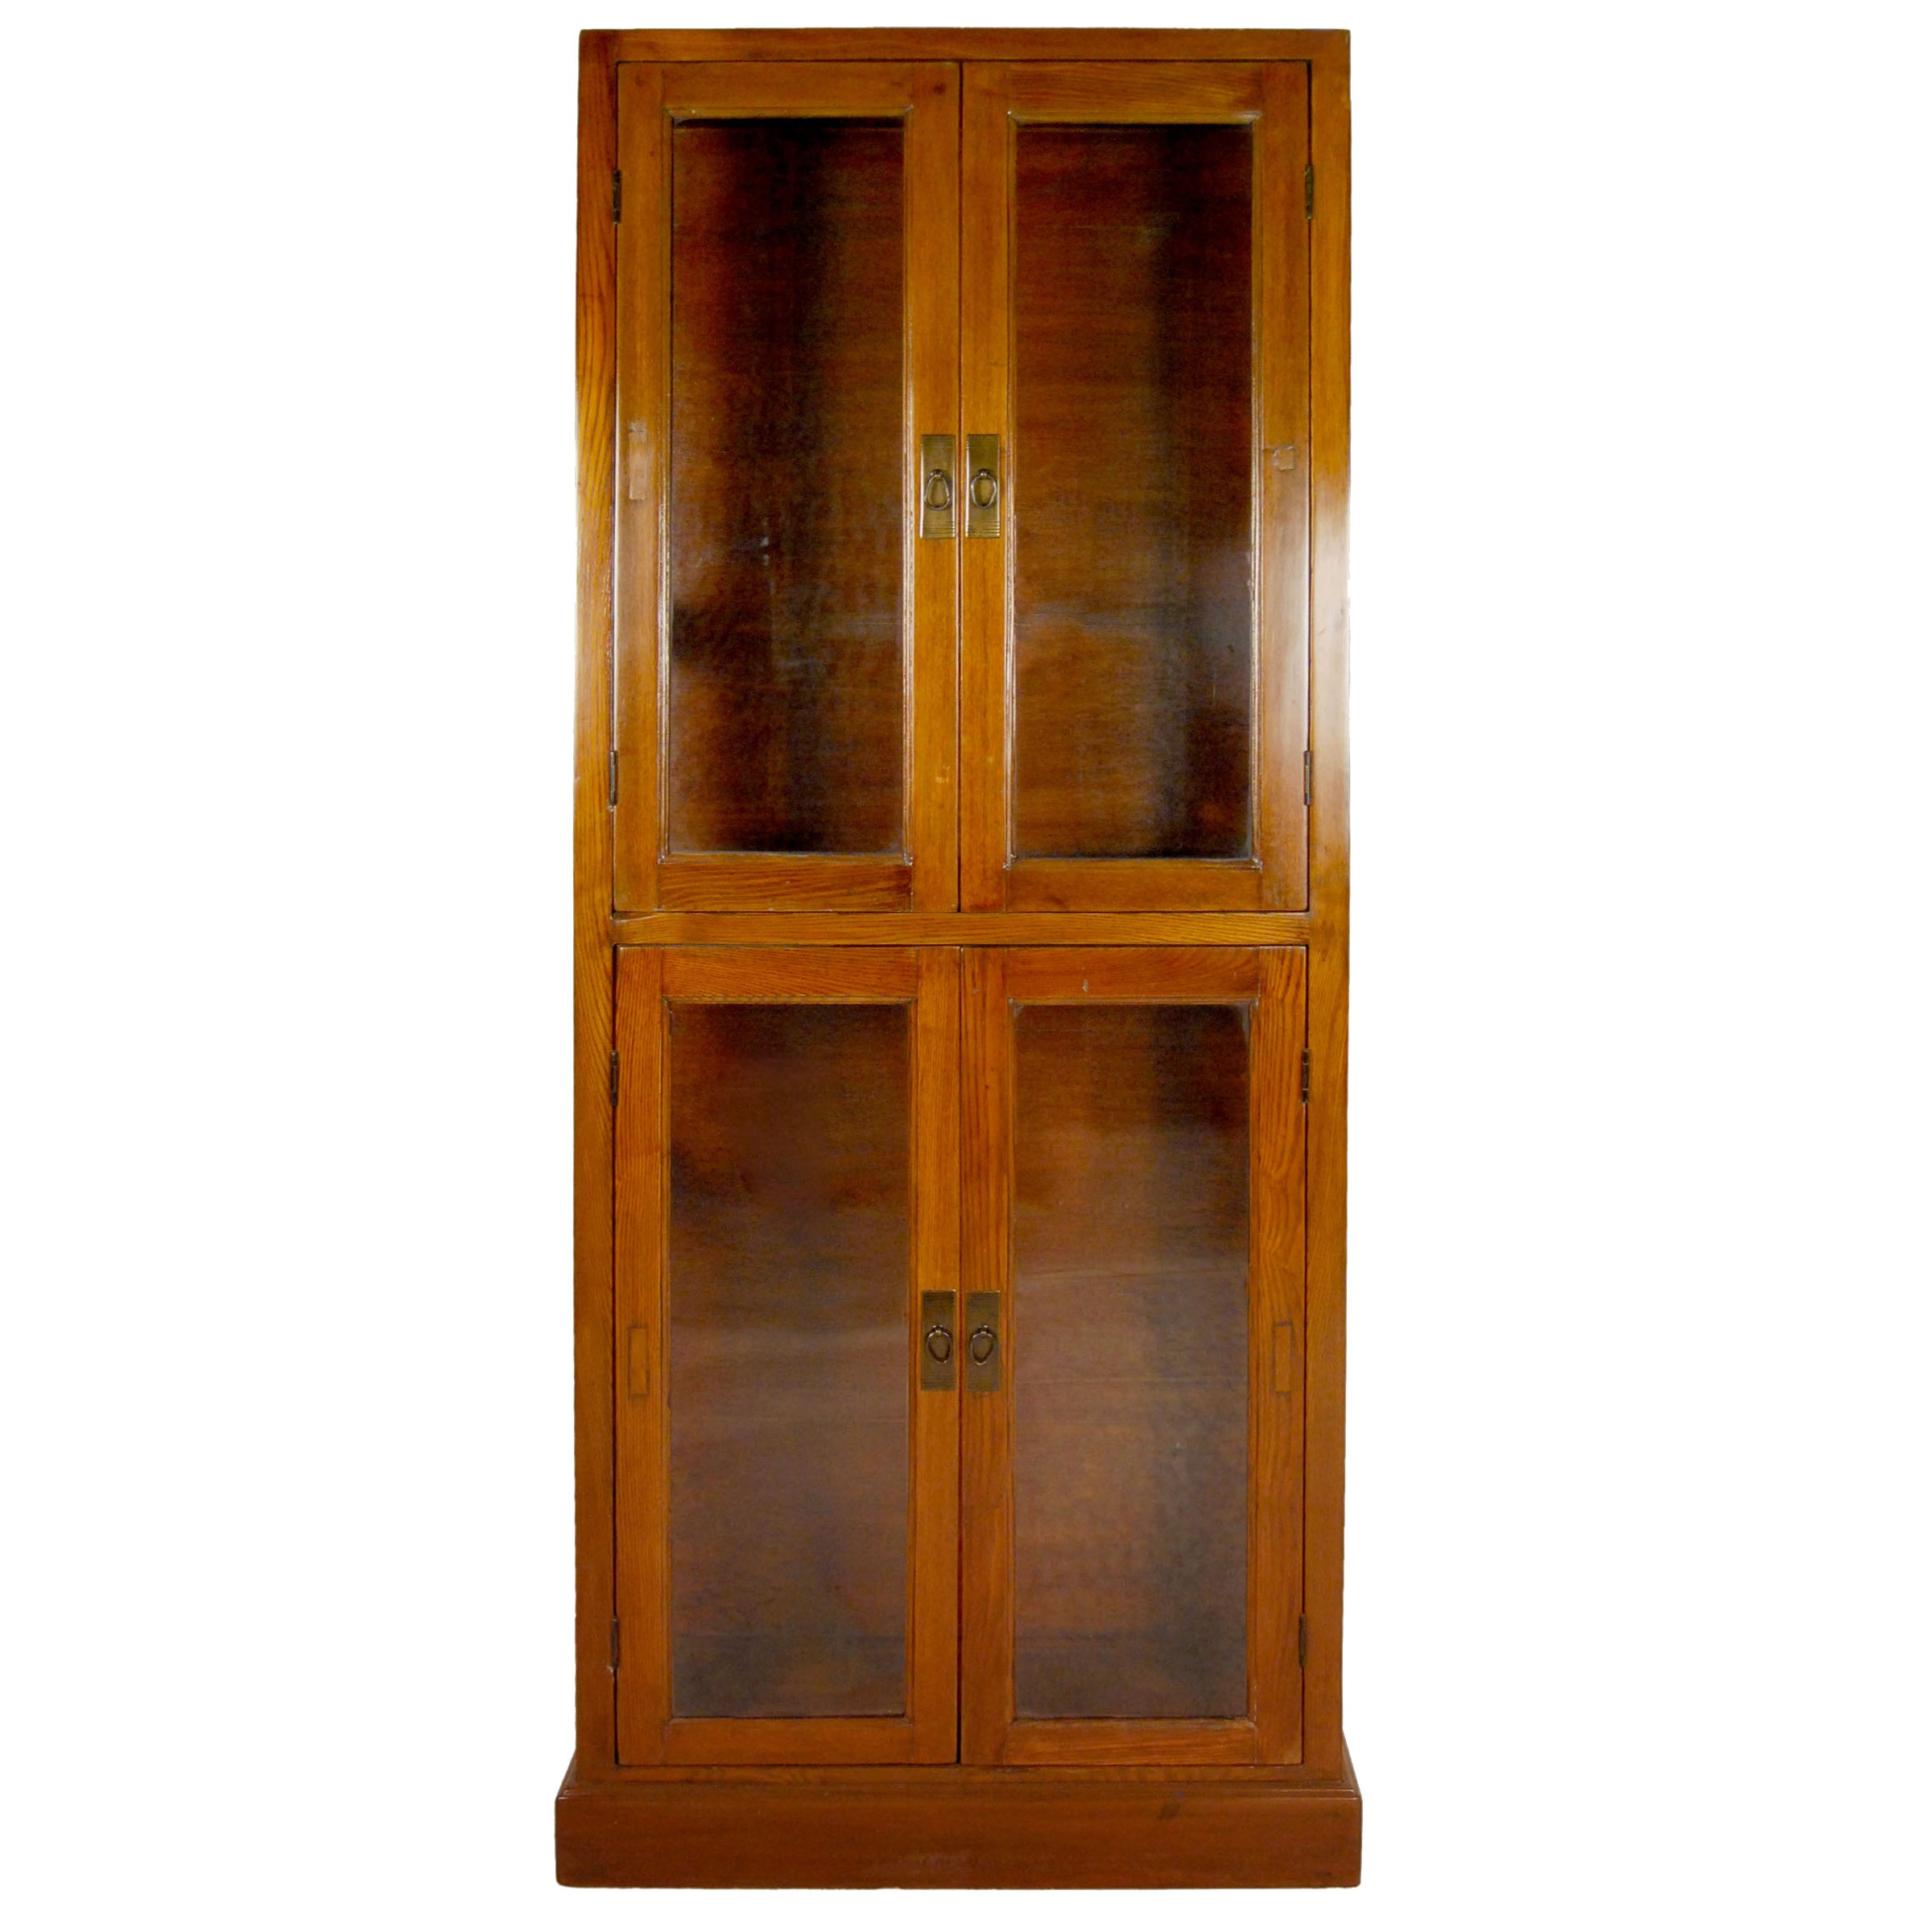 Early 20th Century Chinese Glass Front Display Cabinet